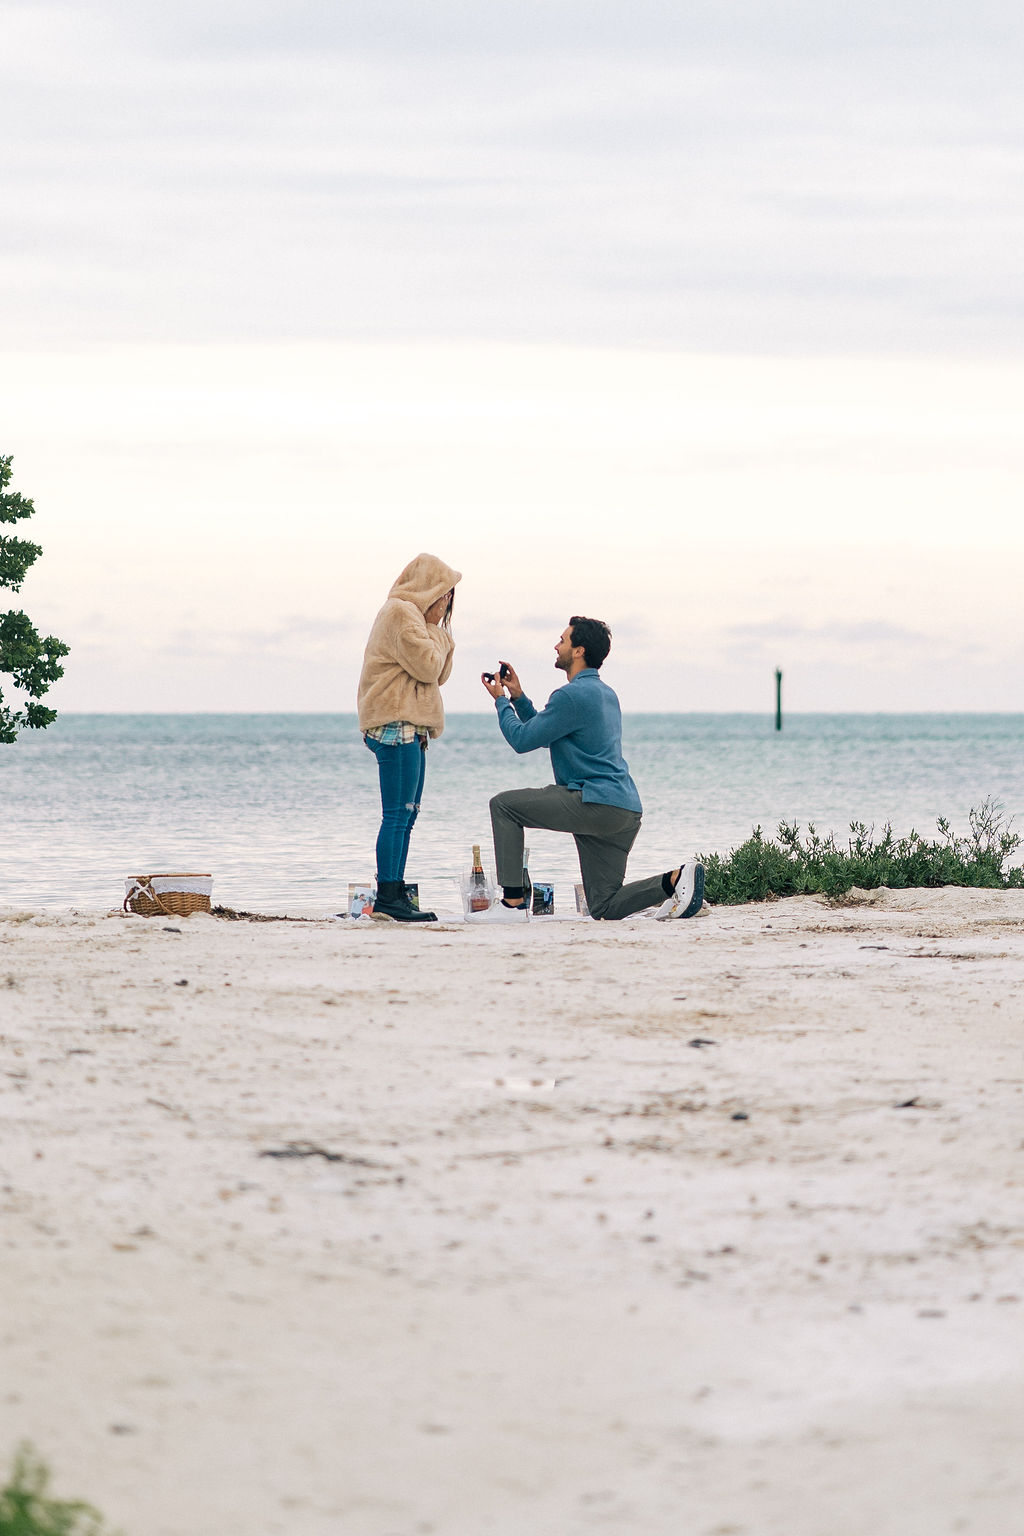 Featured Image of Devin + Emily Anne’s Beach Proposal